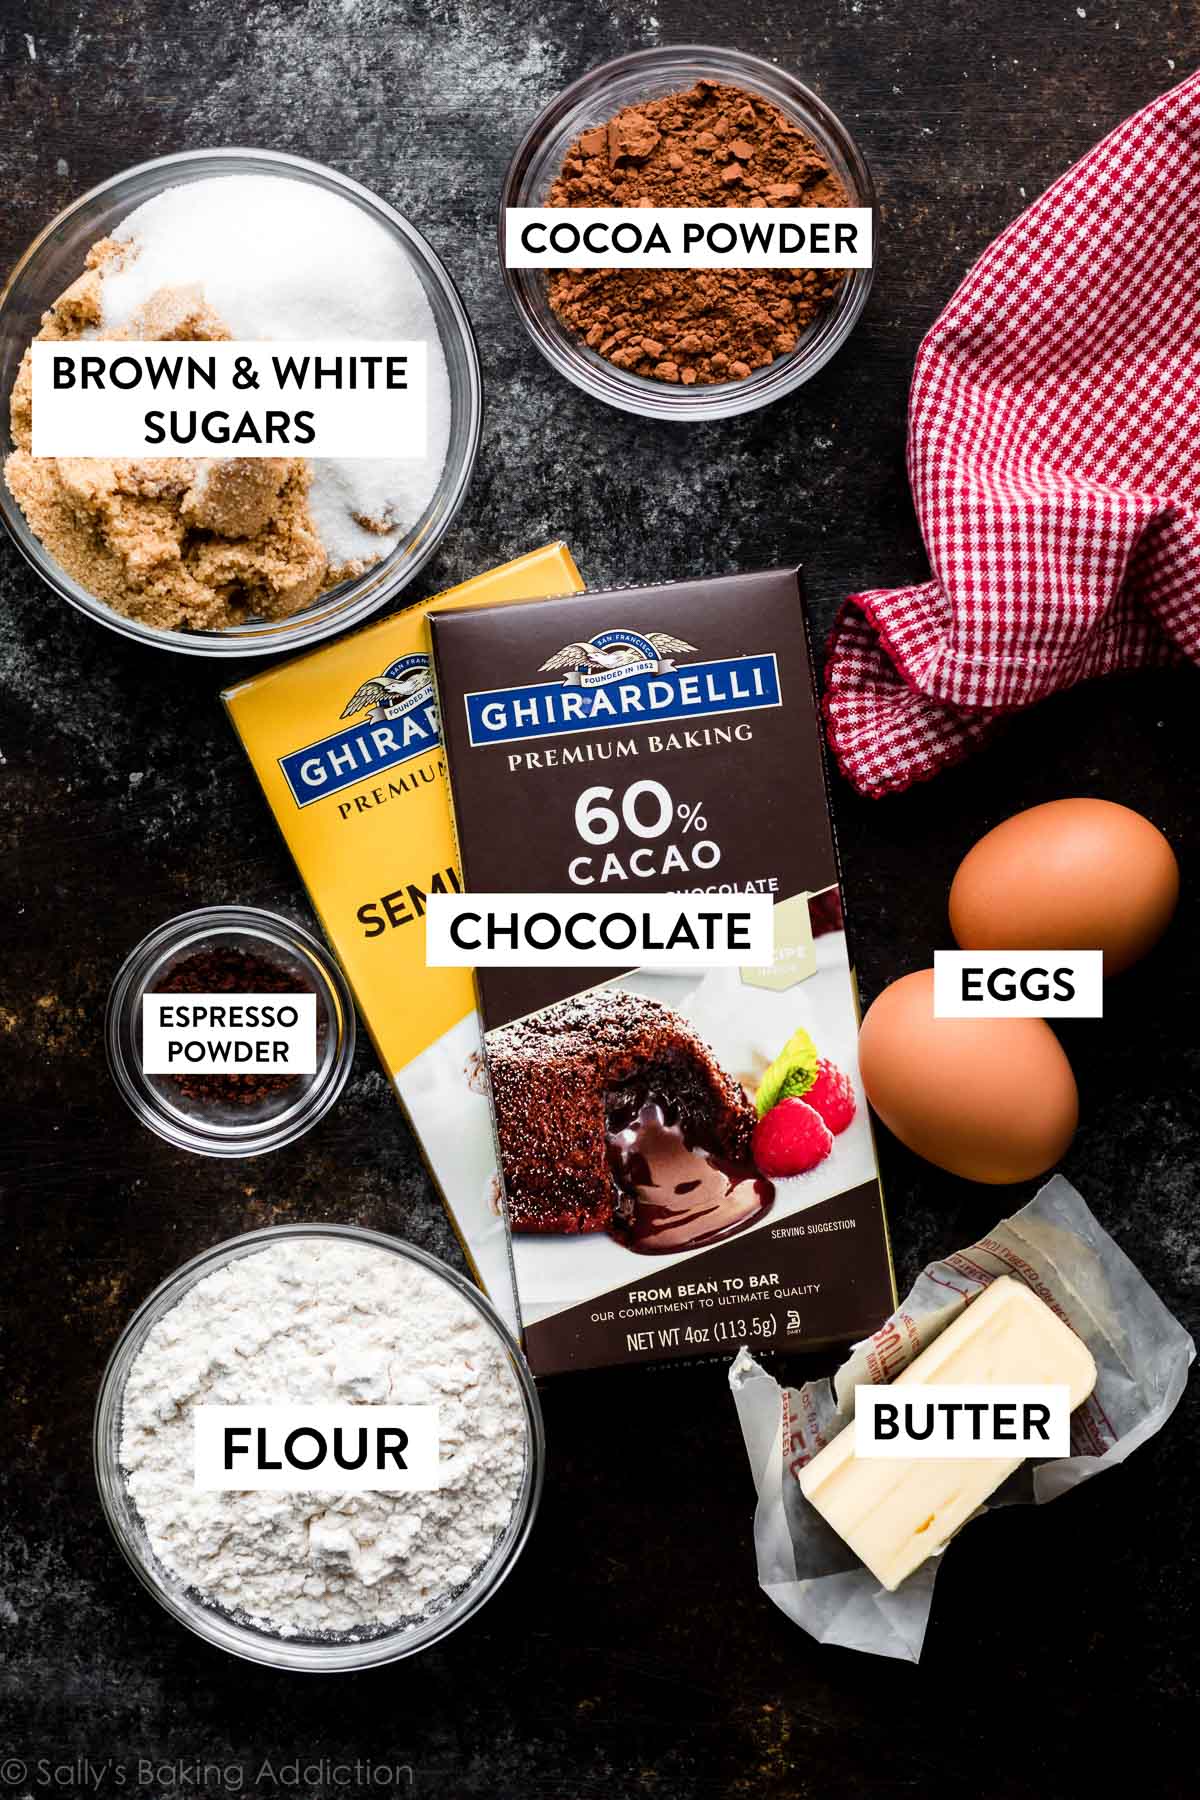 chocolate bars, cocoa powder, brown and white sugars, eggs, and other ingredients